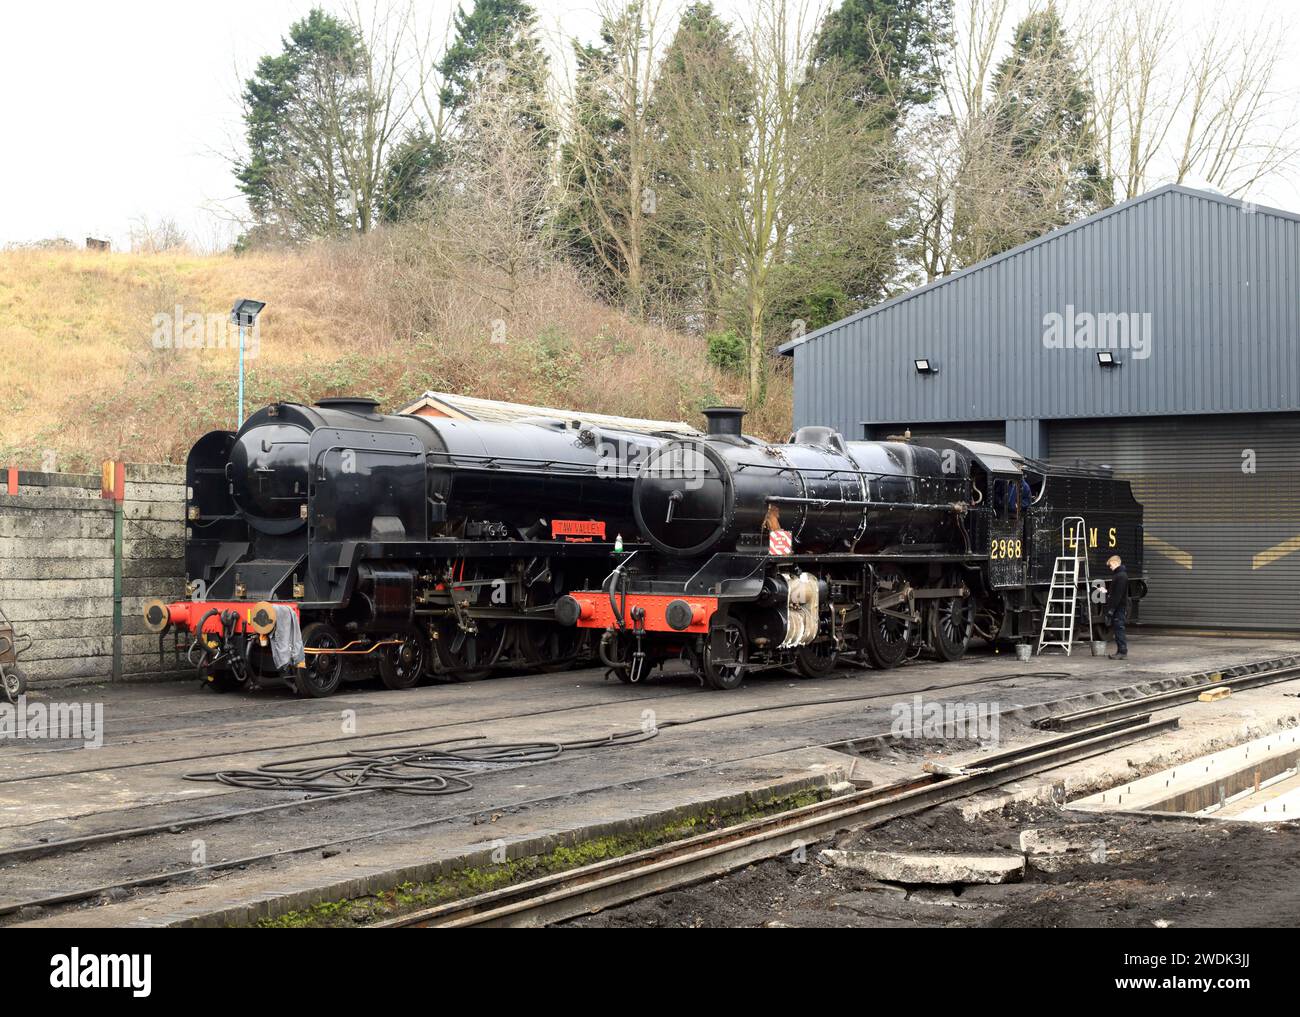 SR West country class 21C127 Taw valley and LMS Stanier mogul 42968 outside the engine sheds at Bridgnorth station on the Severn valley railway. Stock Photo